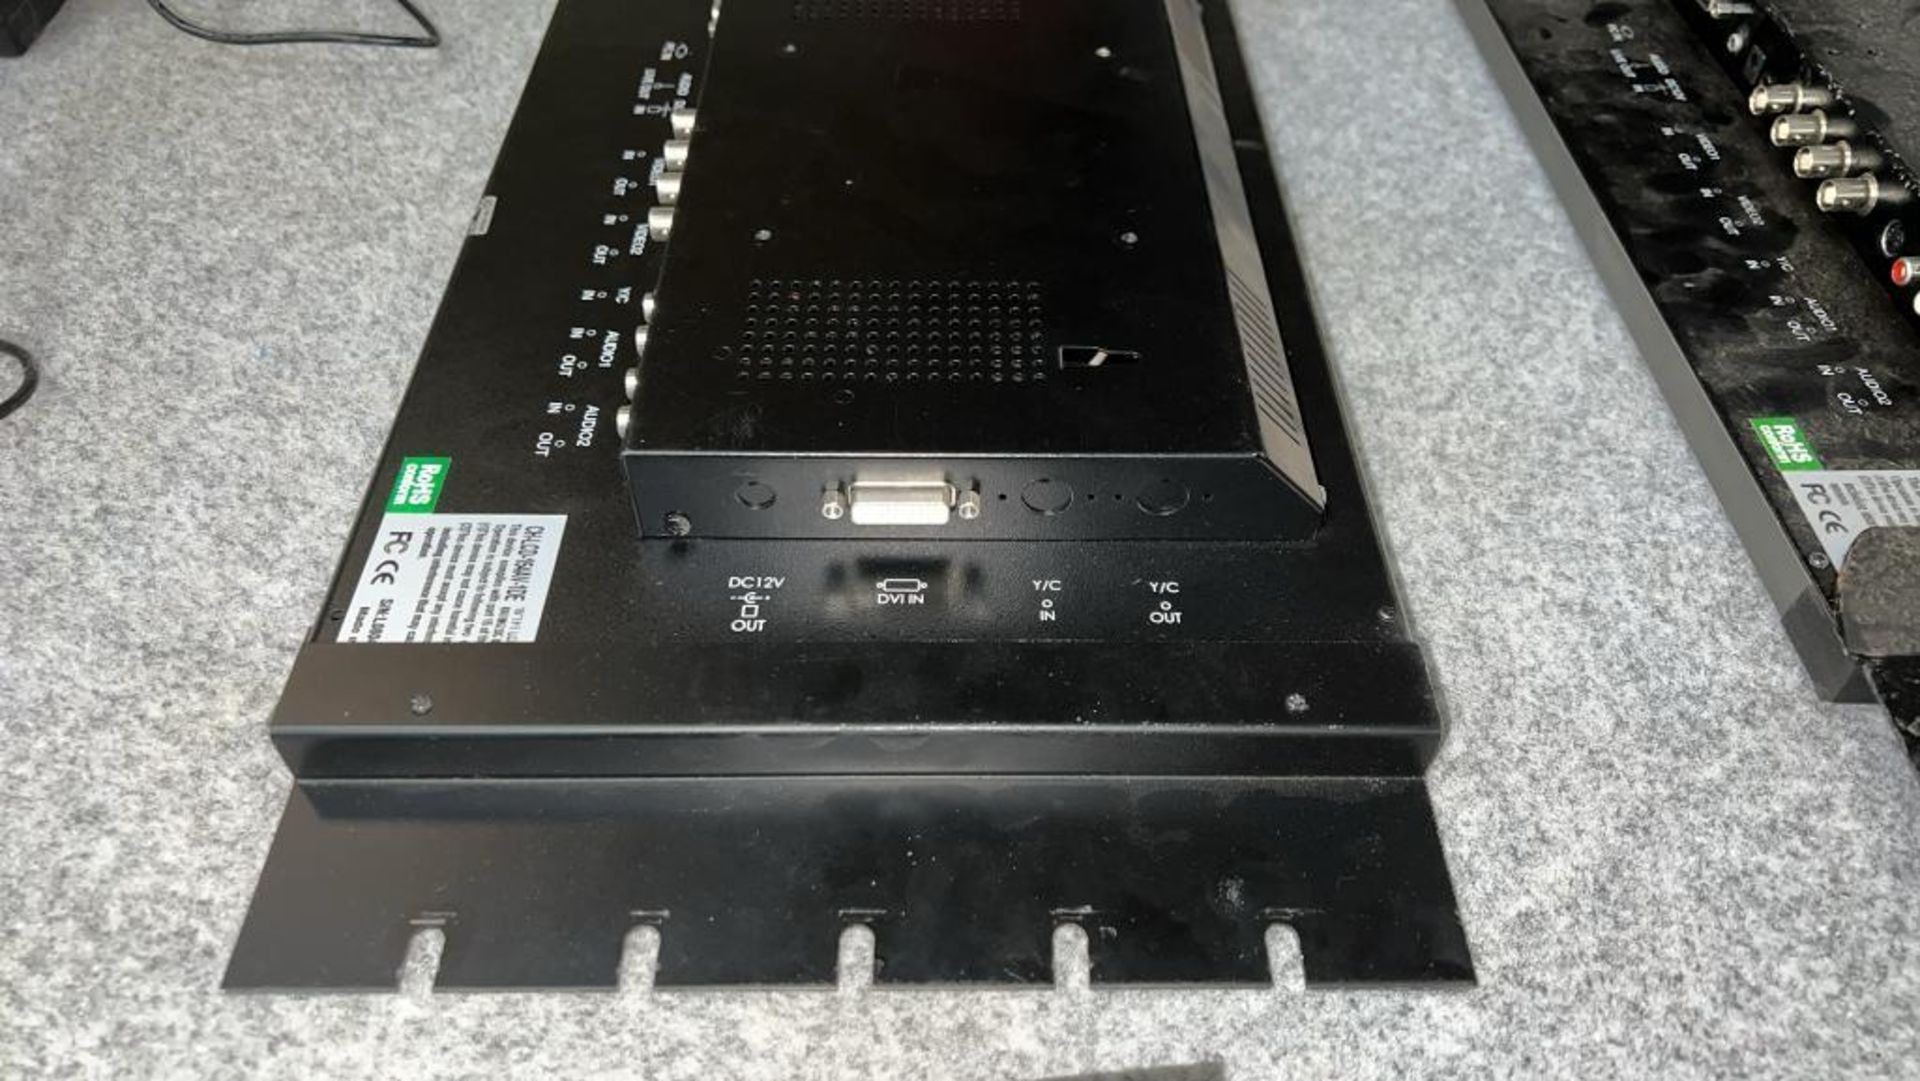 (Qty 4) 15.4"LCD monitors with 4x psu's in two variants of metal mounting brackets Model: CH-LCD 154 - Image 11 of 14